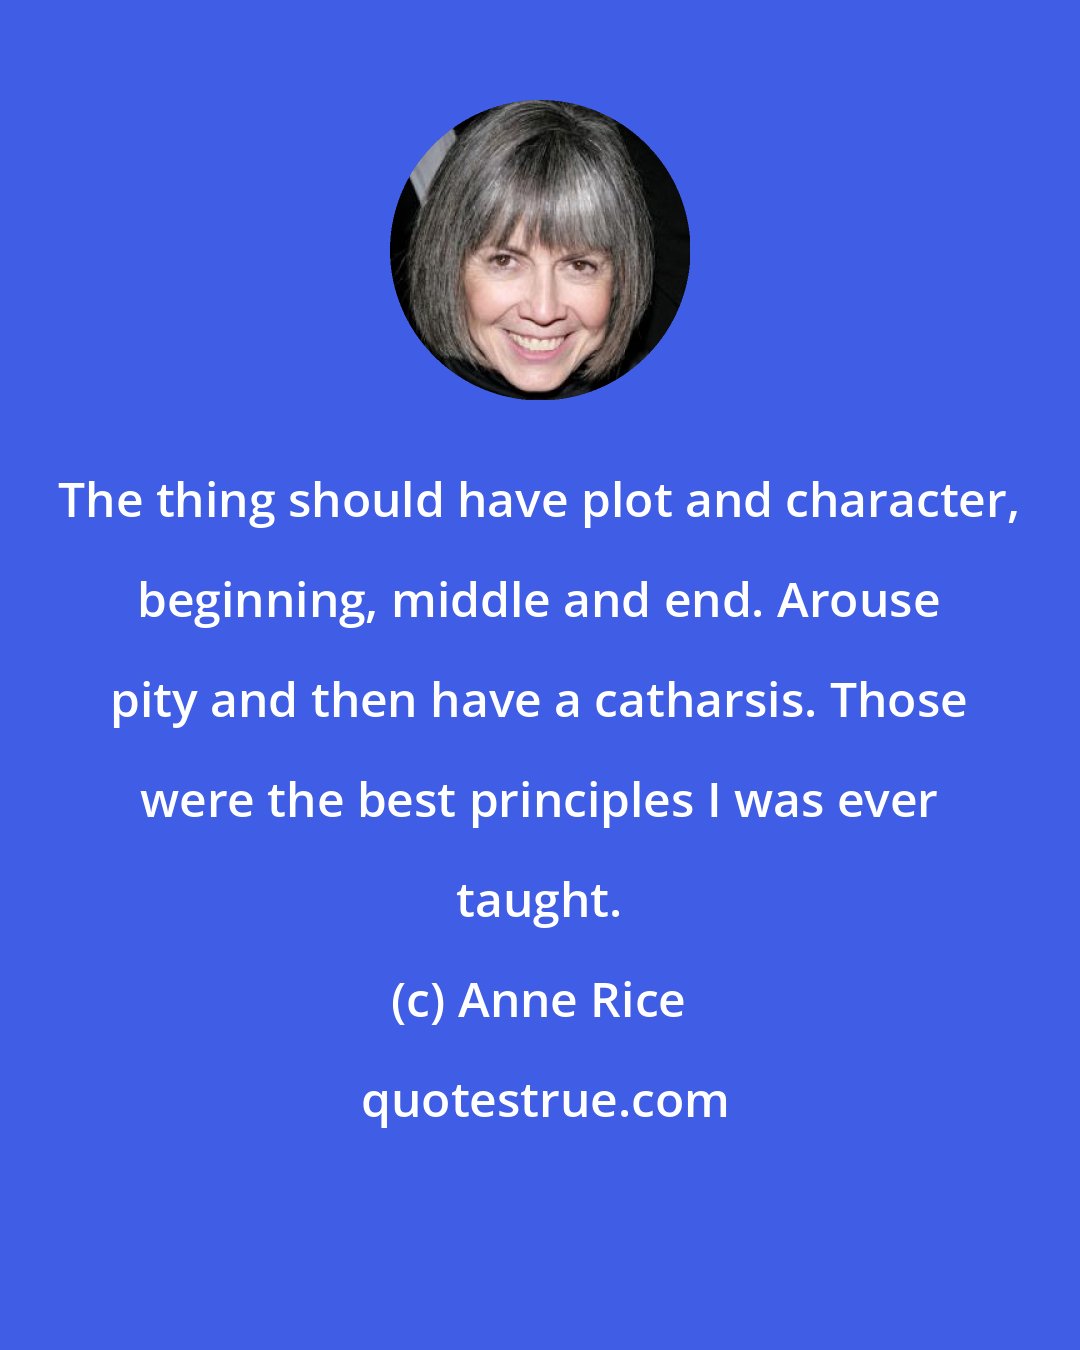 Anne Rice: The thing should have plot and character, beginning, middle and end. Arouse pity and then have a catharsis. Those were the best principles I was ever taught.